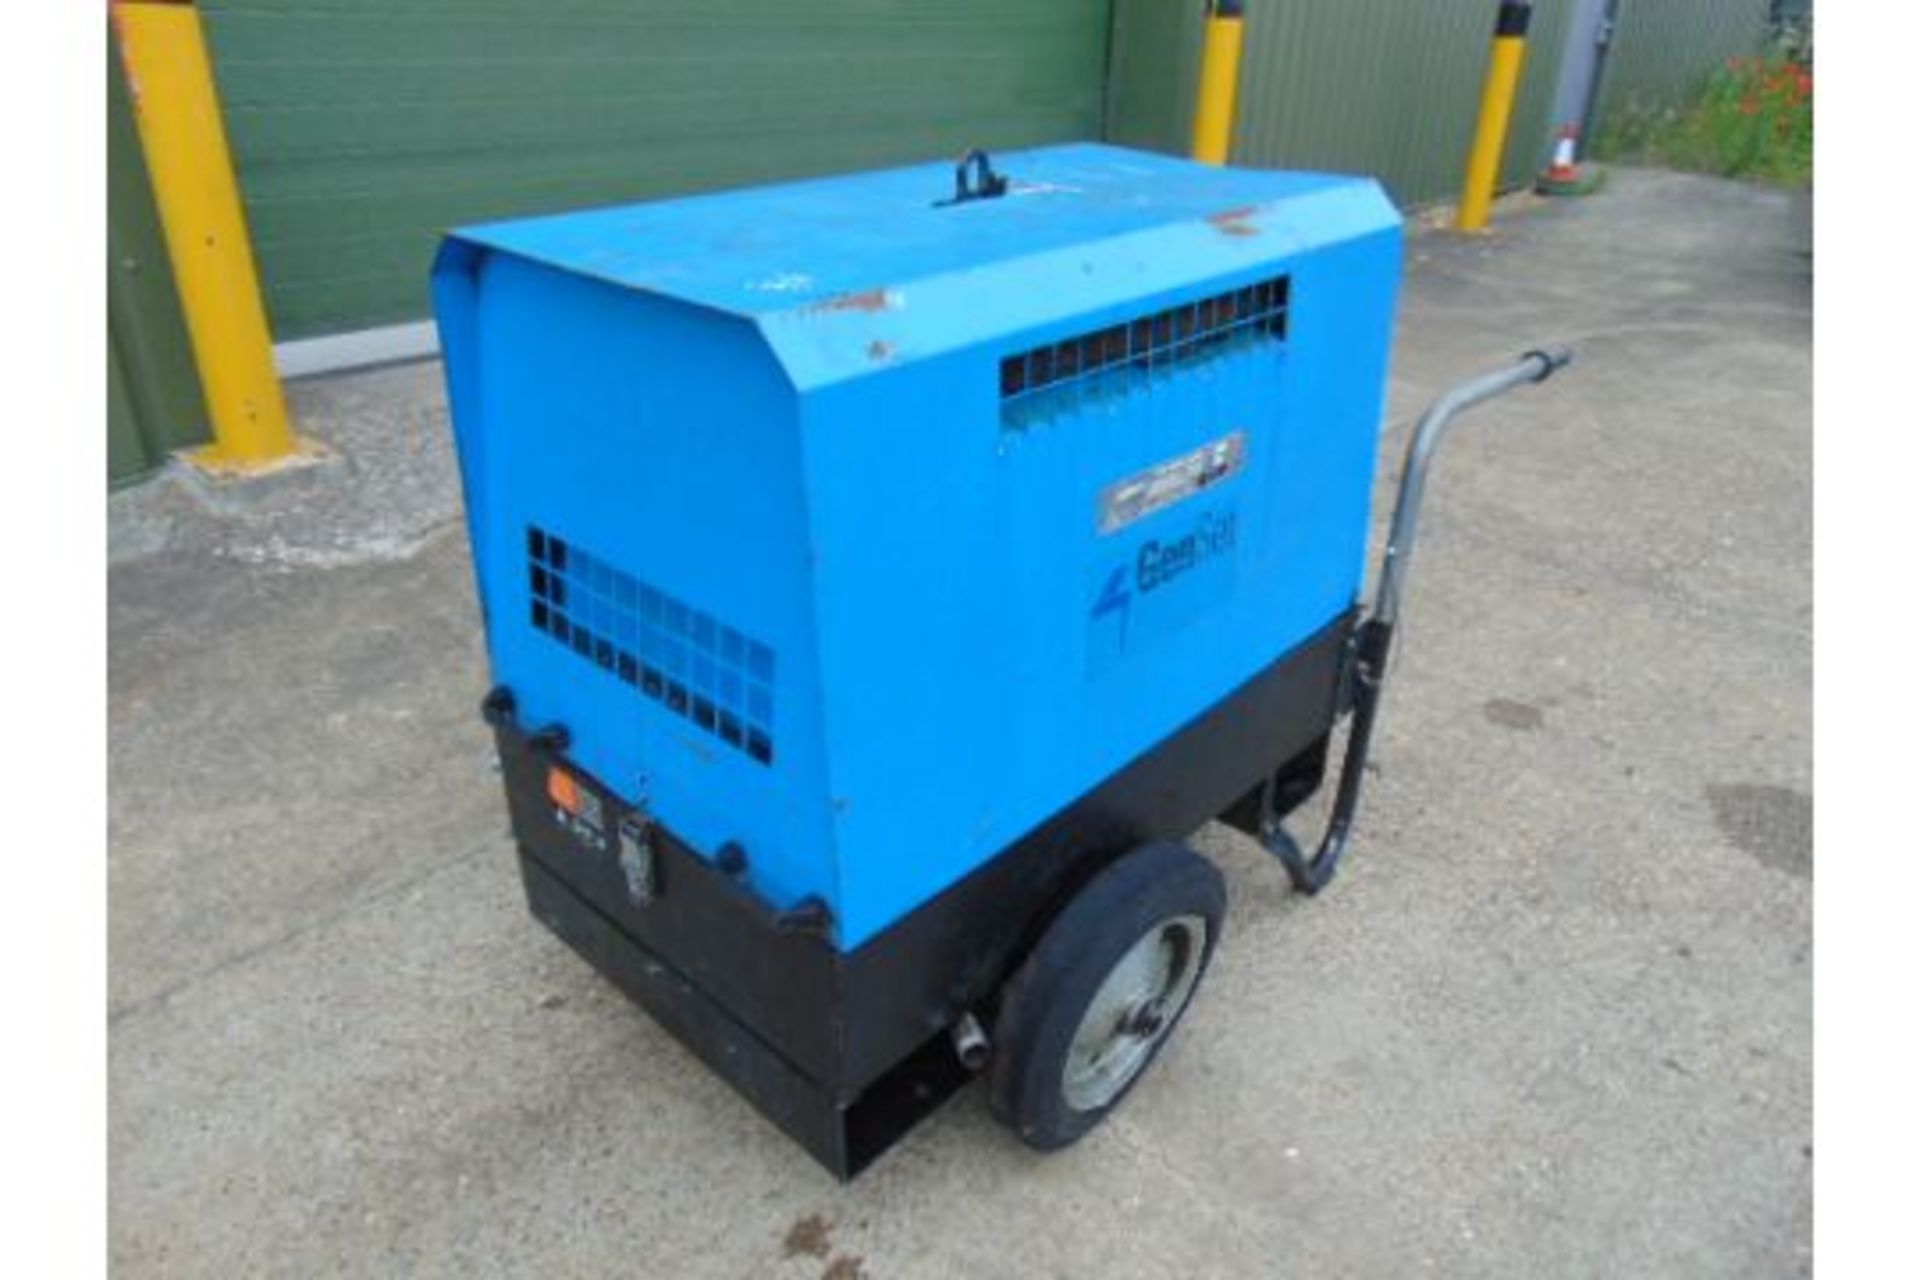 Genset MG 6000 E-SSY 6KVA Diesel Generator ONLY 3,877 HOURS - Image 4 of 11